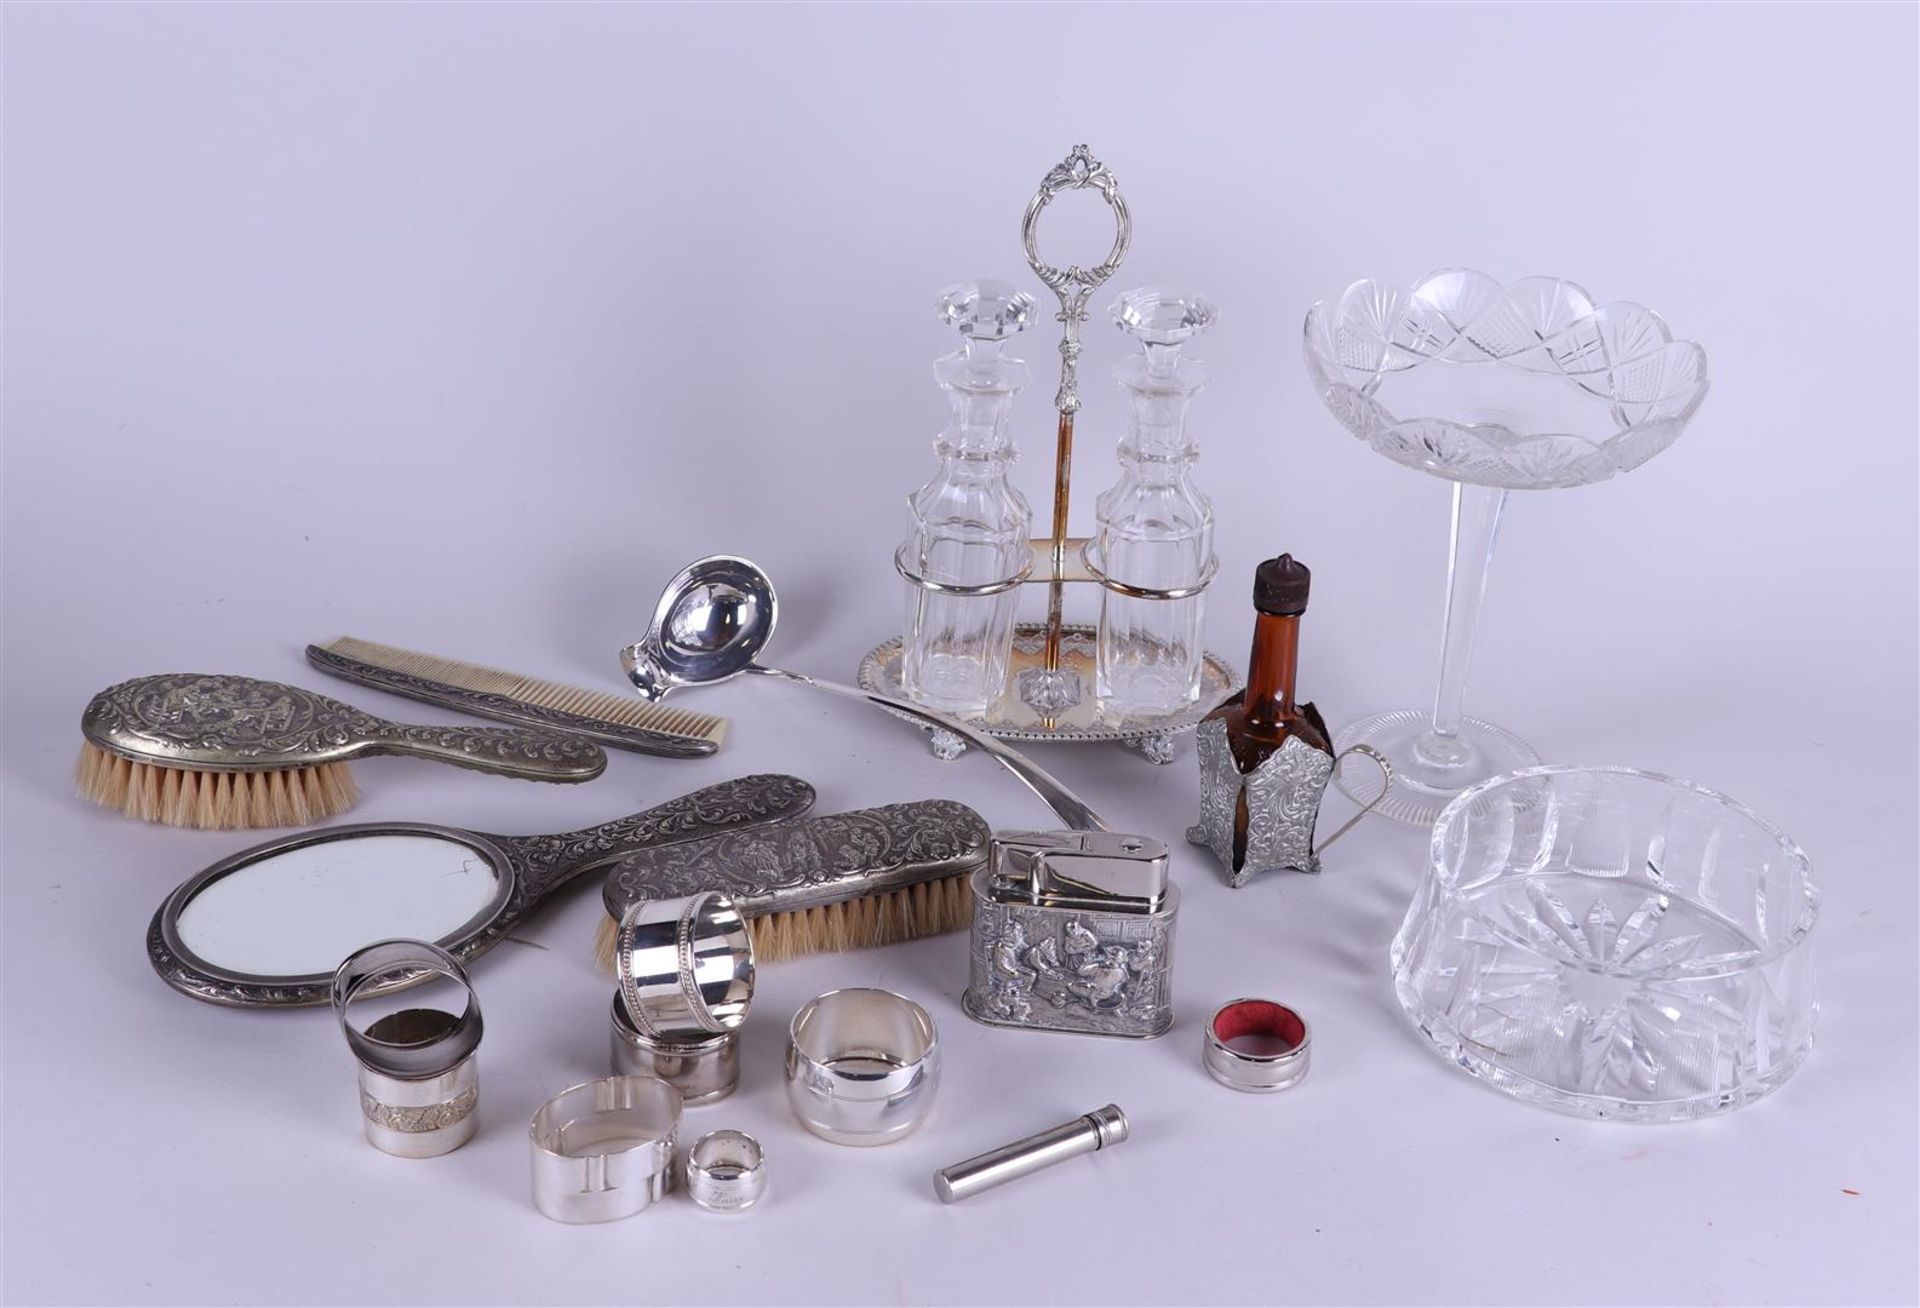 A lot of various silver-plated objects and glassware, including a vinegar set.